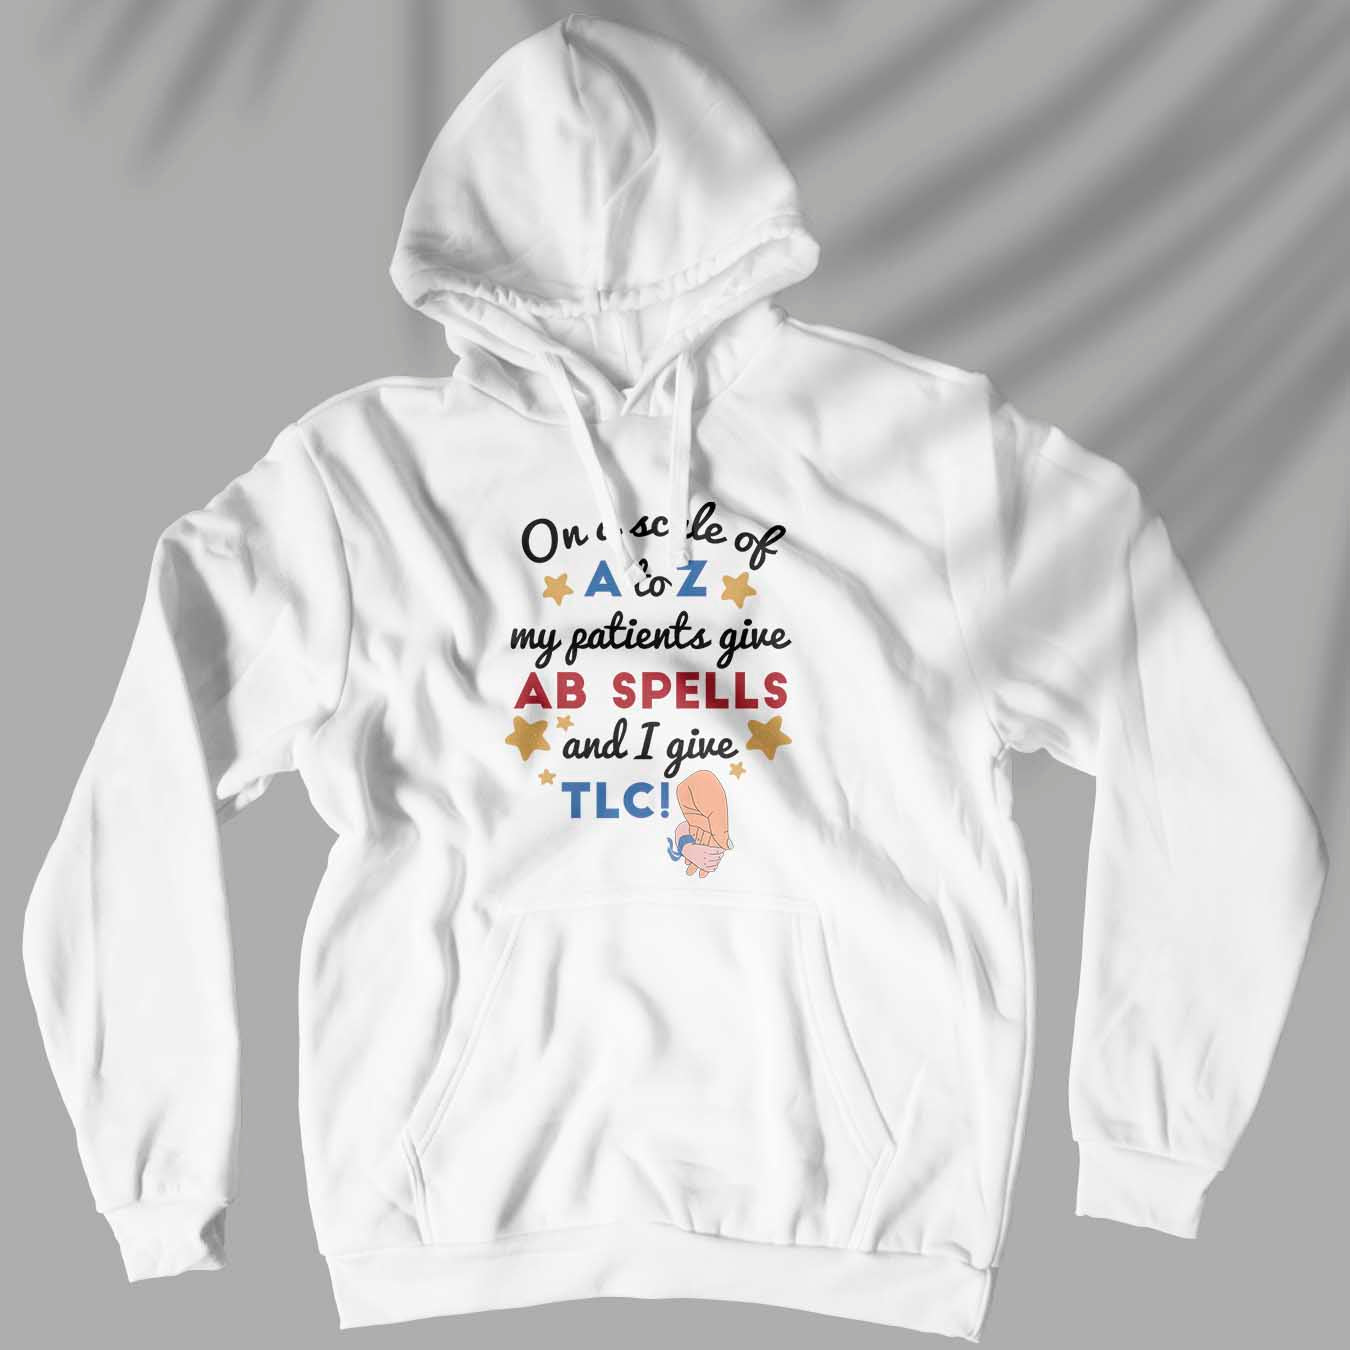 On A Scale Of A To Z - Unisex Hoodie